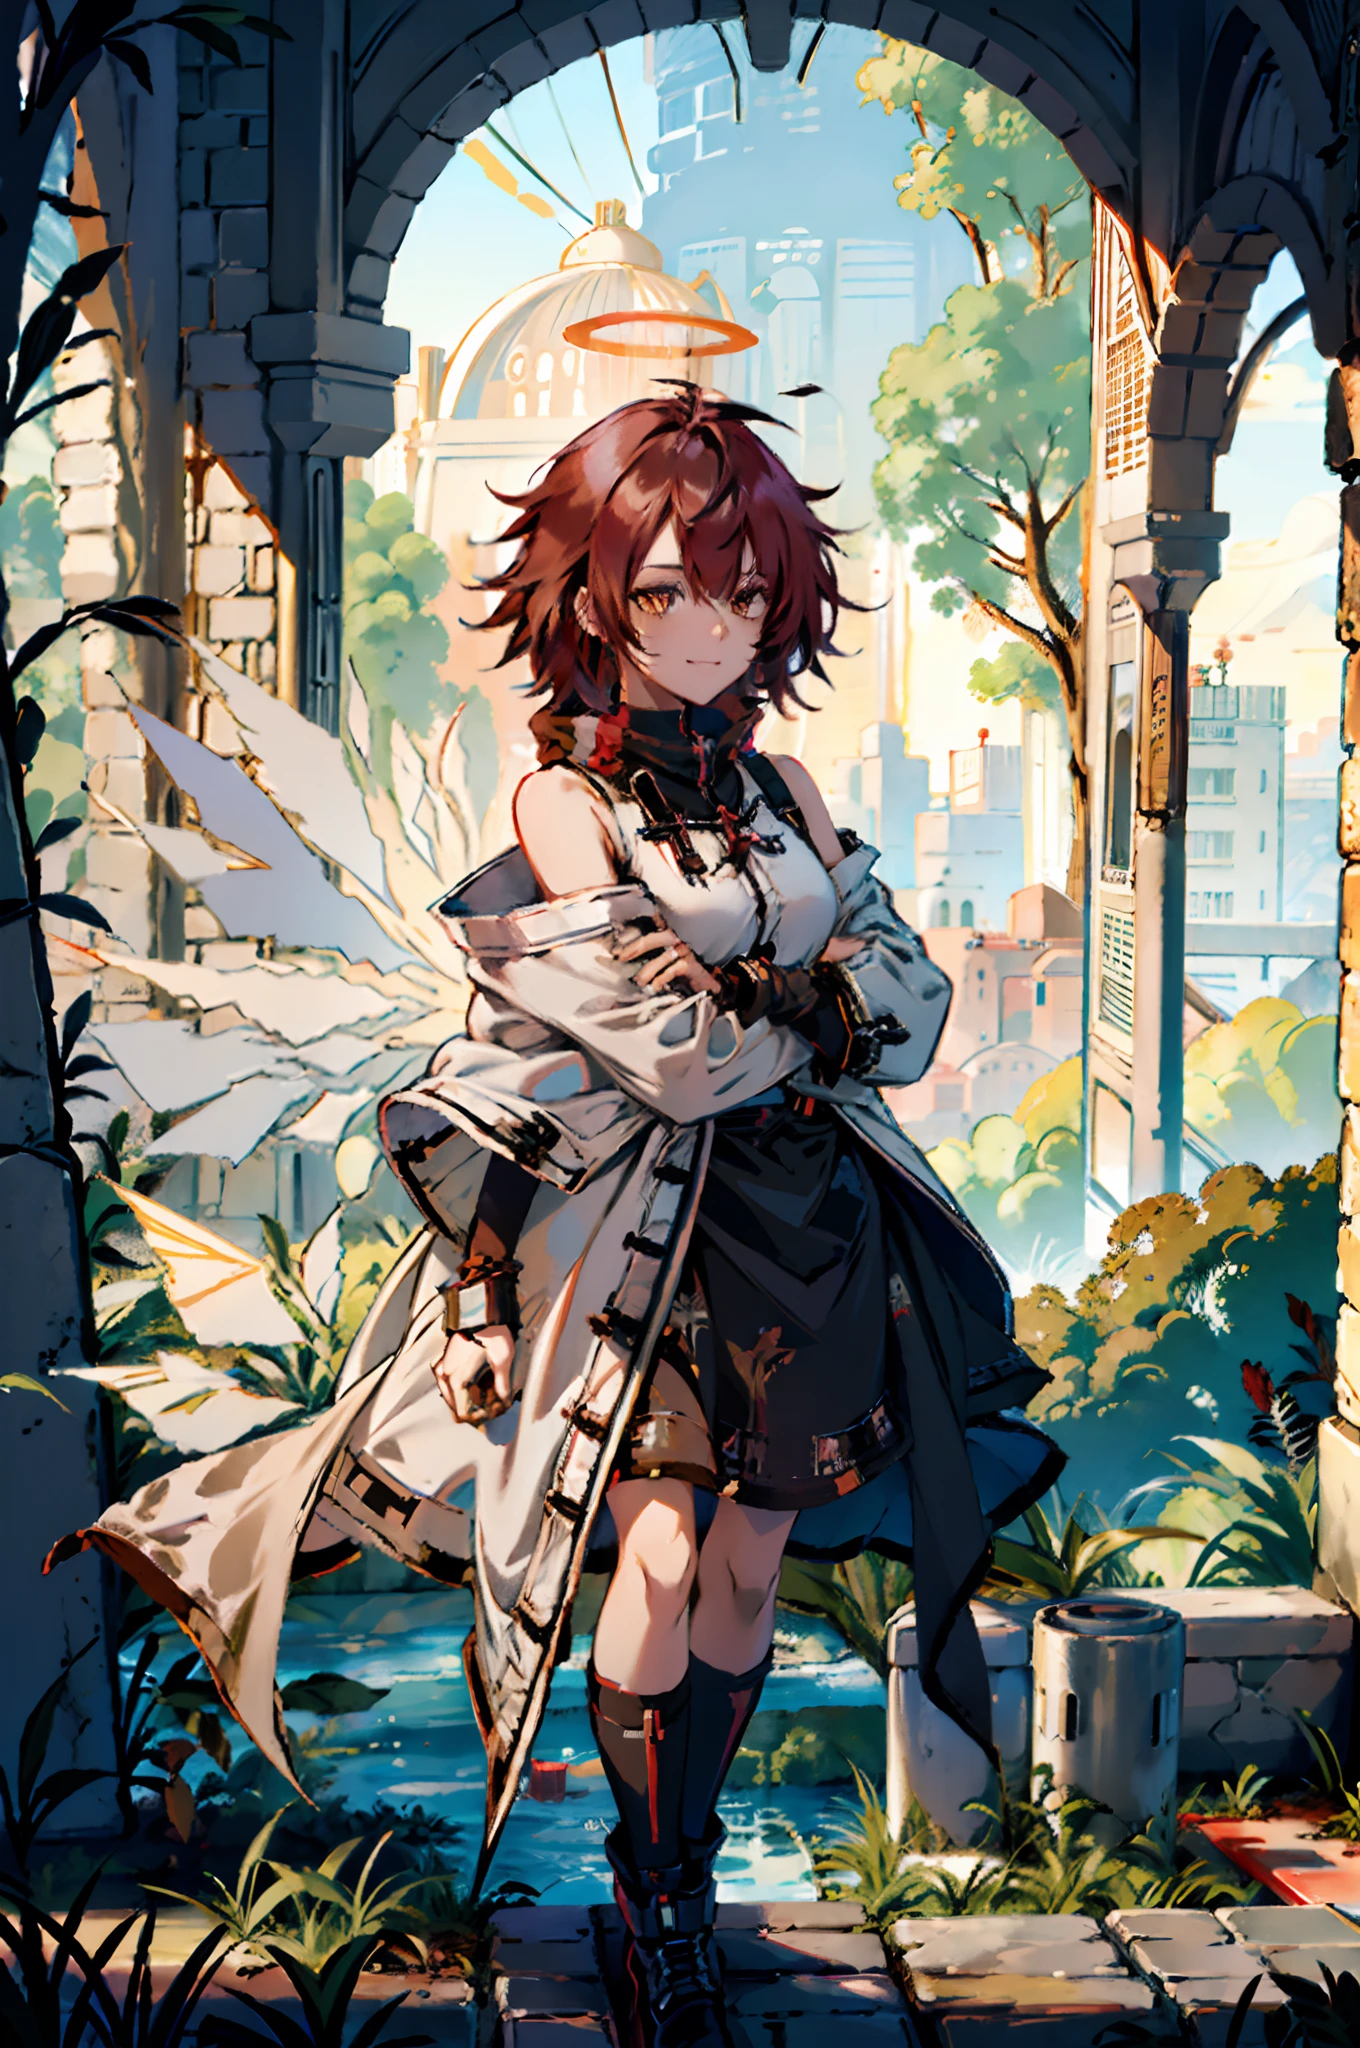 Pure sky，mechanical leg，Black mechanical legs，Plump legs，Red gem setting，Anime girl standing gracefully on the ground，Black cape and red hair, rogue anime girl, Anime girl standing, Wearing a cloak on the blasted plain, asuka suit under clothes!, angel girl, badass posture, mechanic punk outfit, anime styled 3d, render of a cute 3d anime girl, gapmoe yandere grimdark, Female character，musculature，Abs，glowing bright yellow eyes，Black hair with red gradient，short detailed hair，Bunched hair，Dull hair，（Muscle 2.0），Tomboyish，Be red in the face，looking at viewert，Elaborate Eyes，Black mechanical legs，huge tit，1.5，Put your hands in your pockets，ssmile，blacksilk，Straight big breasts，strappy，Black cutout miniskirt，White bandeau，Toothless smile，Lower breast，Mechanical wind，There are no cities，Side breasts，Excitation，Top crotch，Sexy lower abdomen，extremely large bosom，the wind blowing up the skirt，High-fork panties，looking at viewert，nabel，chest-hugging，The halo，dynamicposes，Tall anime girl，cropped shoulders